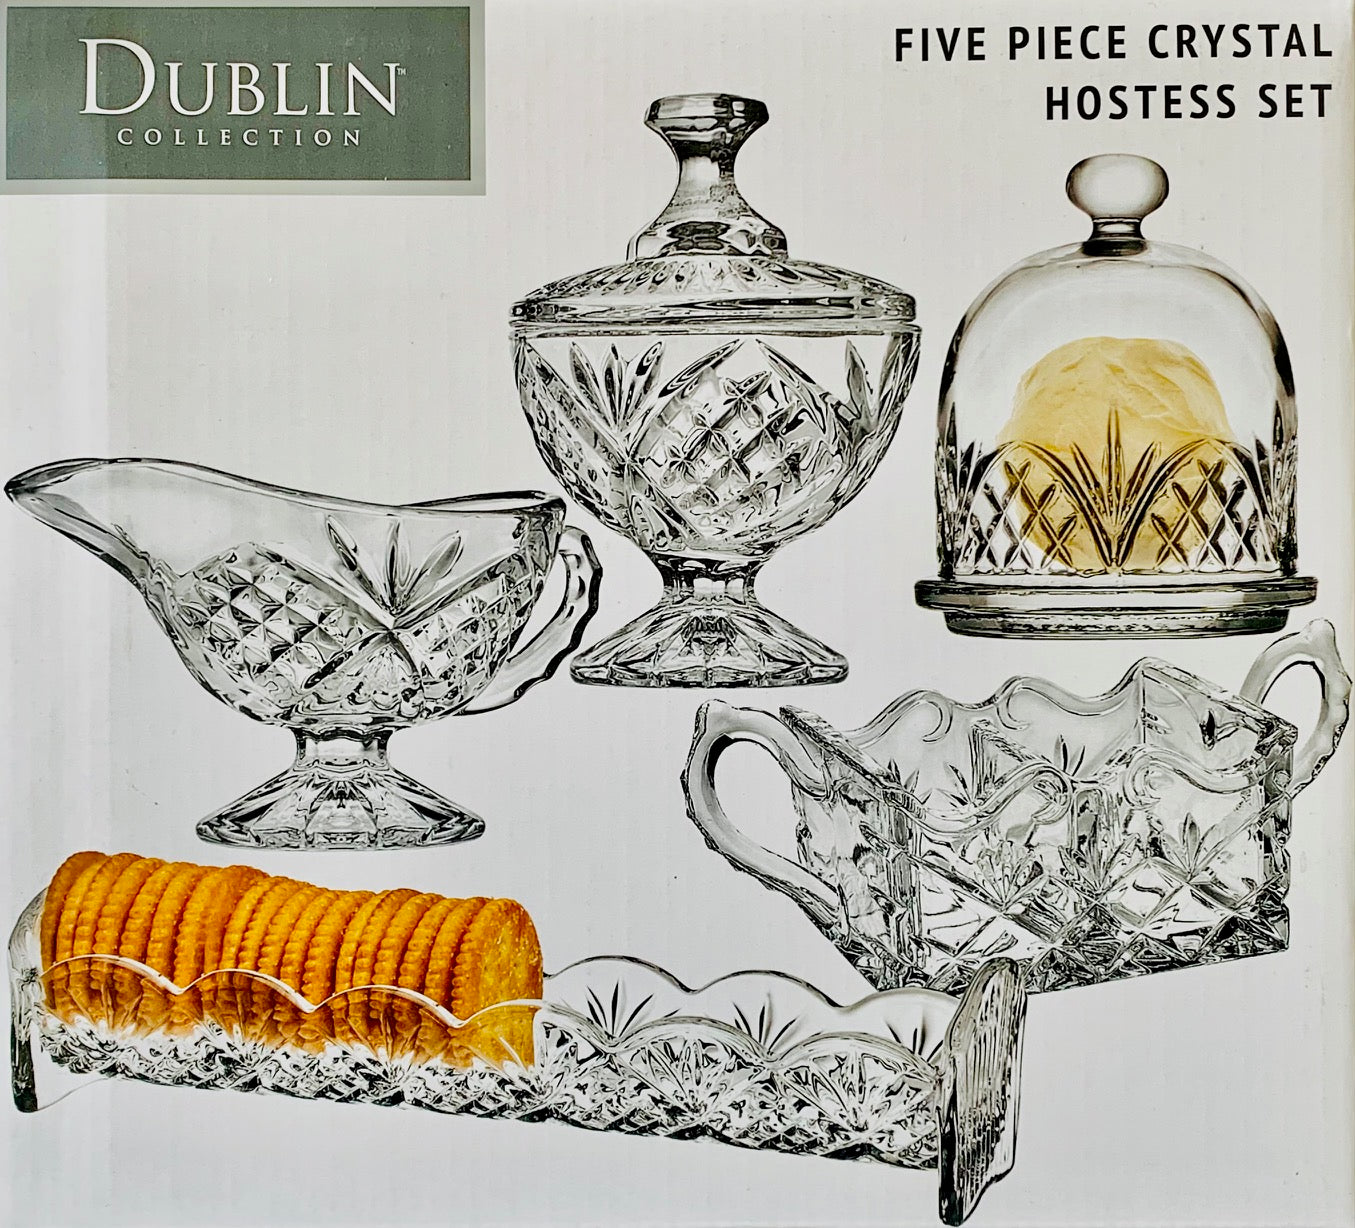 Hostess Crystal 5 piece Set Dublin Collection from Godinger - Royal Gift